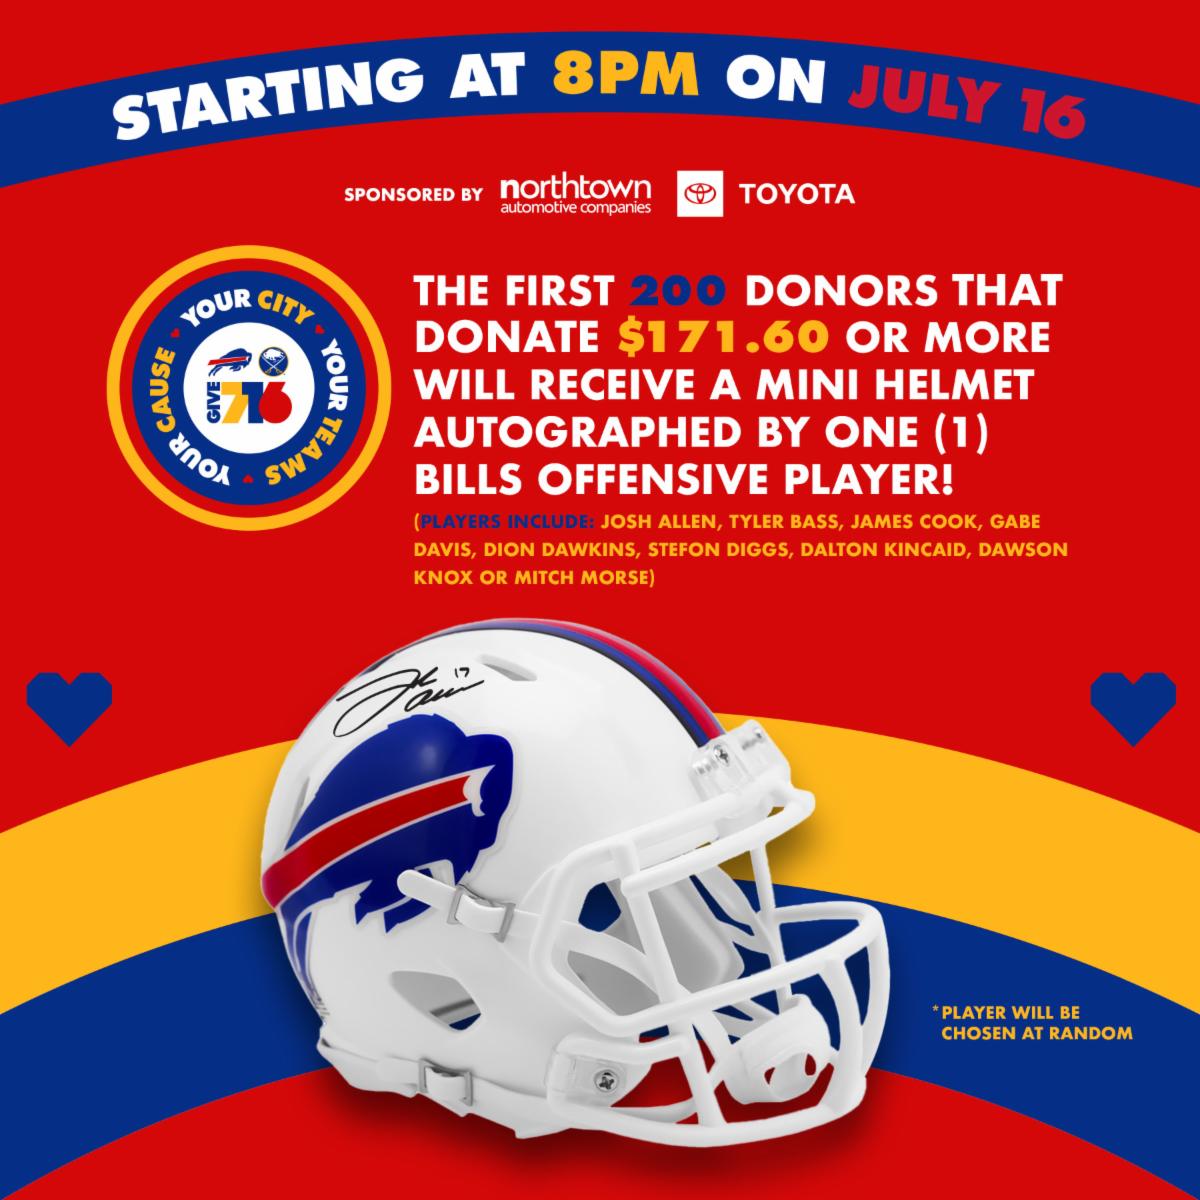 STARTING AT 8 PM! FIRST 200 DONORS TO DONATE $171.60 OR MORE RECEIVE A MINI HELMET
AUTOGRAPHED BY ONE (1) BILLS OFFENSIVE PLAYER! (JOSH ALLEN, TYLER BASS, JAMES COOK, GABE DAVIS, DION DAWKINS, STEFON DIGGS, DALTON KINCAID, DAWSON KNOX OR MITCH MORSE. #GIVE716 #ONEBUFFALO https://t.co/5An7WKfa0T